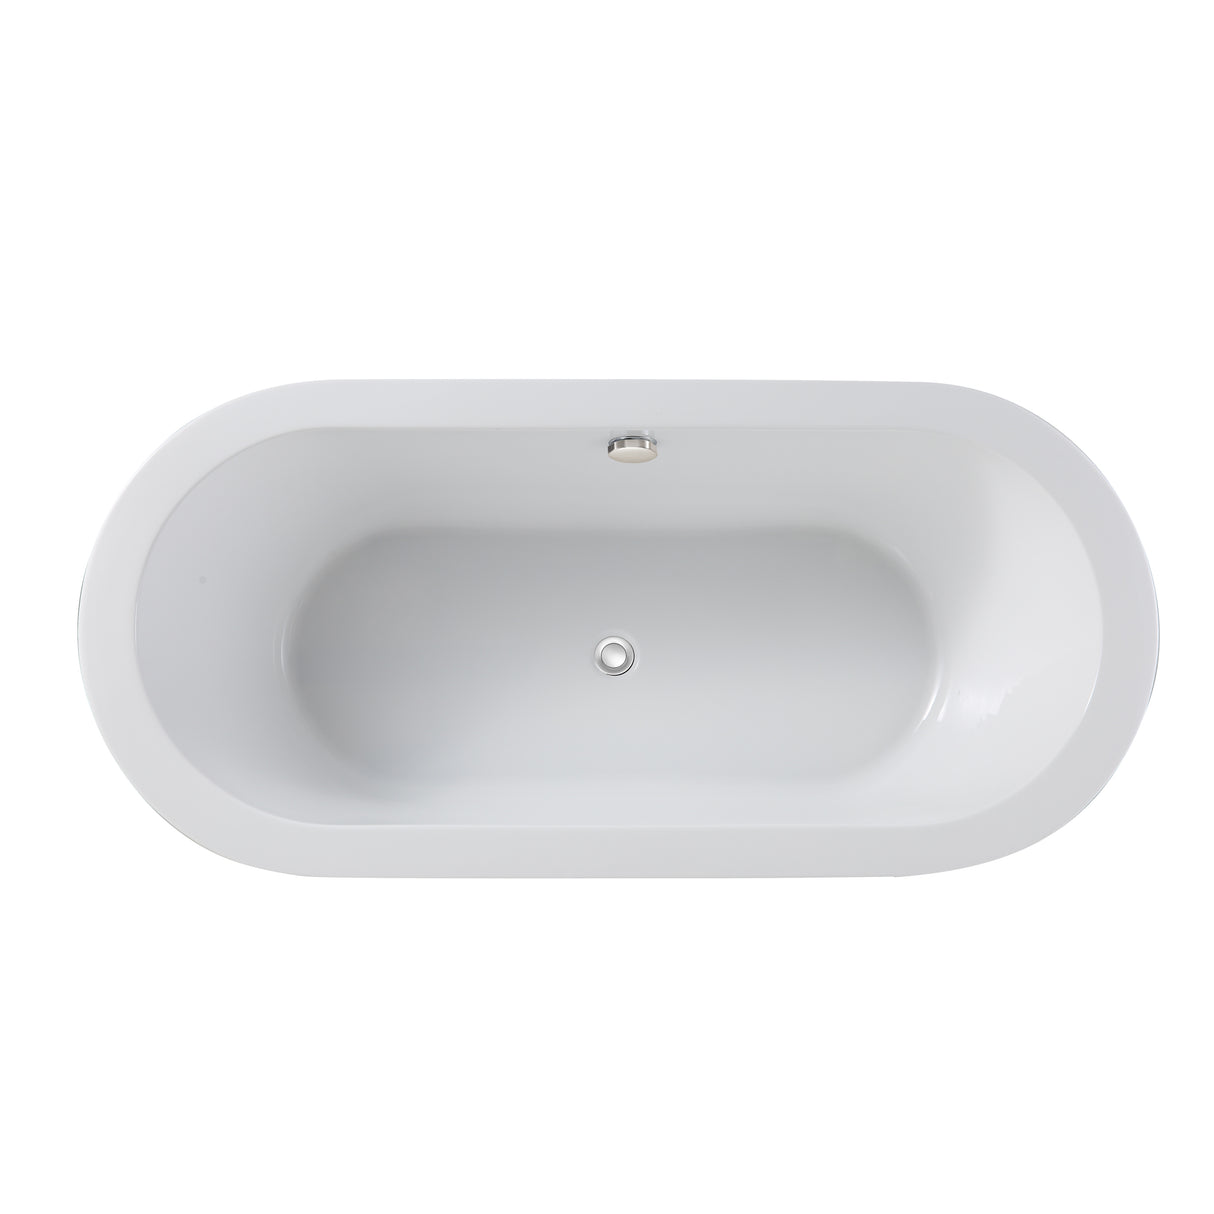 67"L x 31.5\'\'W Acrylic Art Freestanding Alone White Soaking Bathtub with Brushed Nickel Overflow and Pop-up Drain